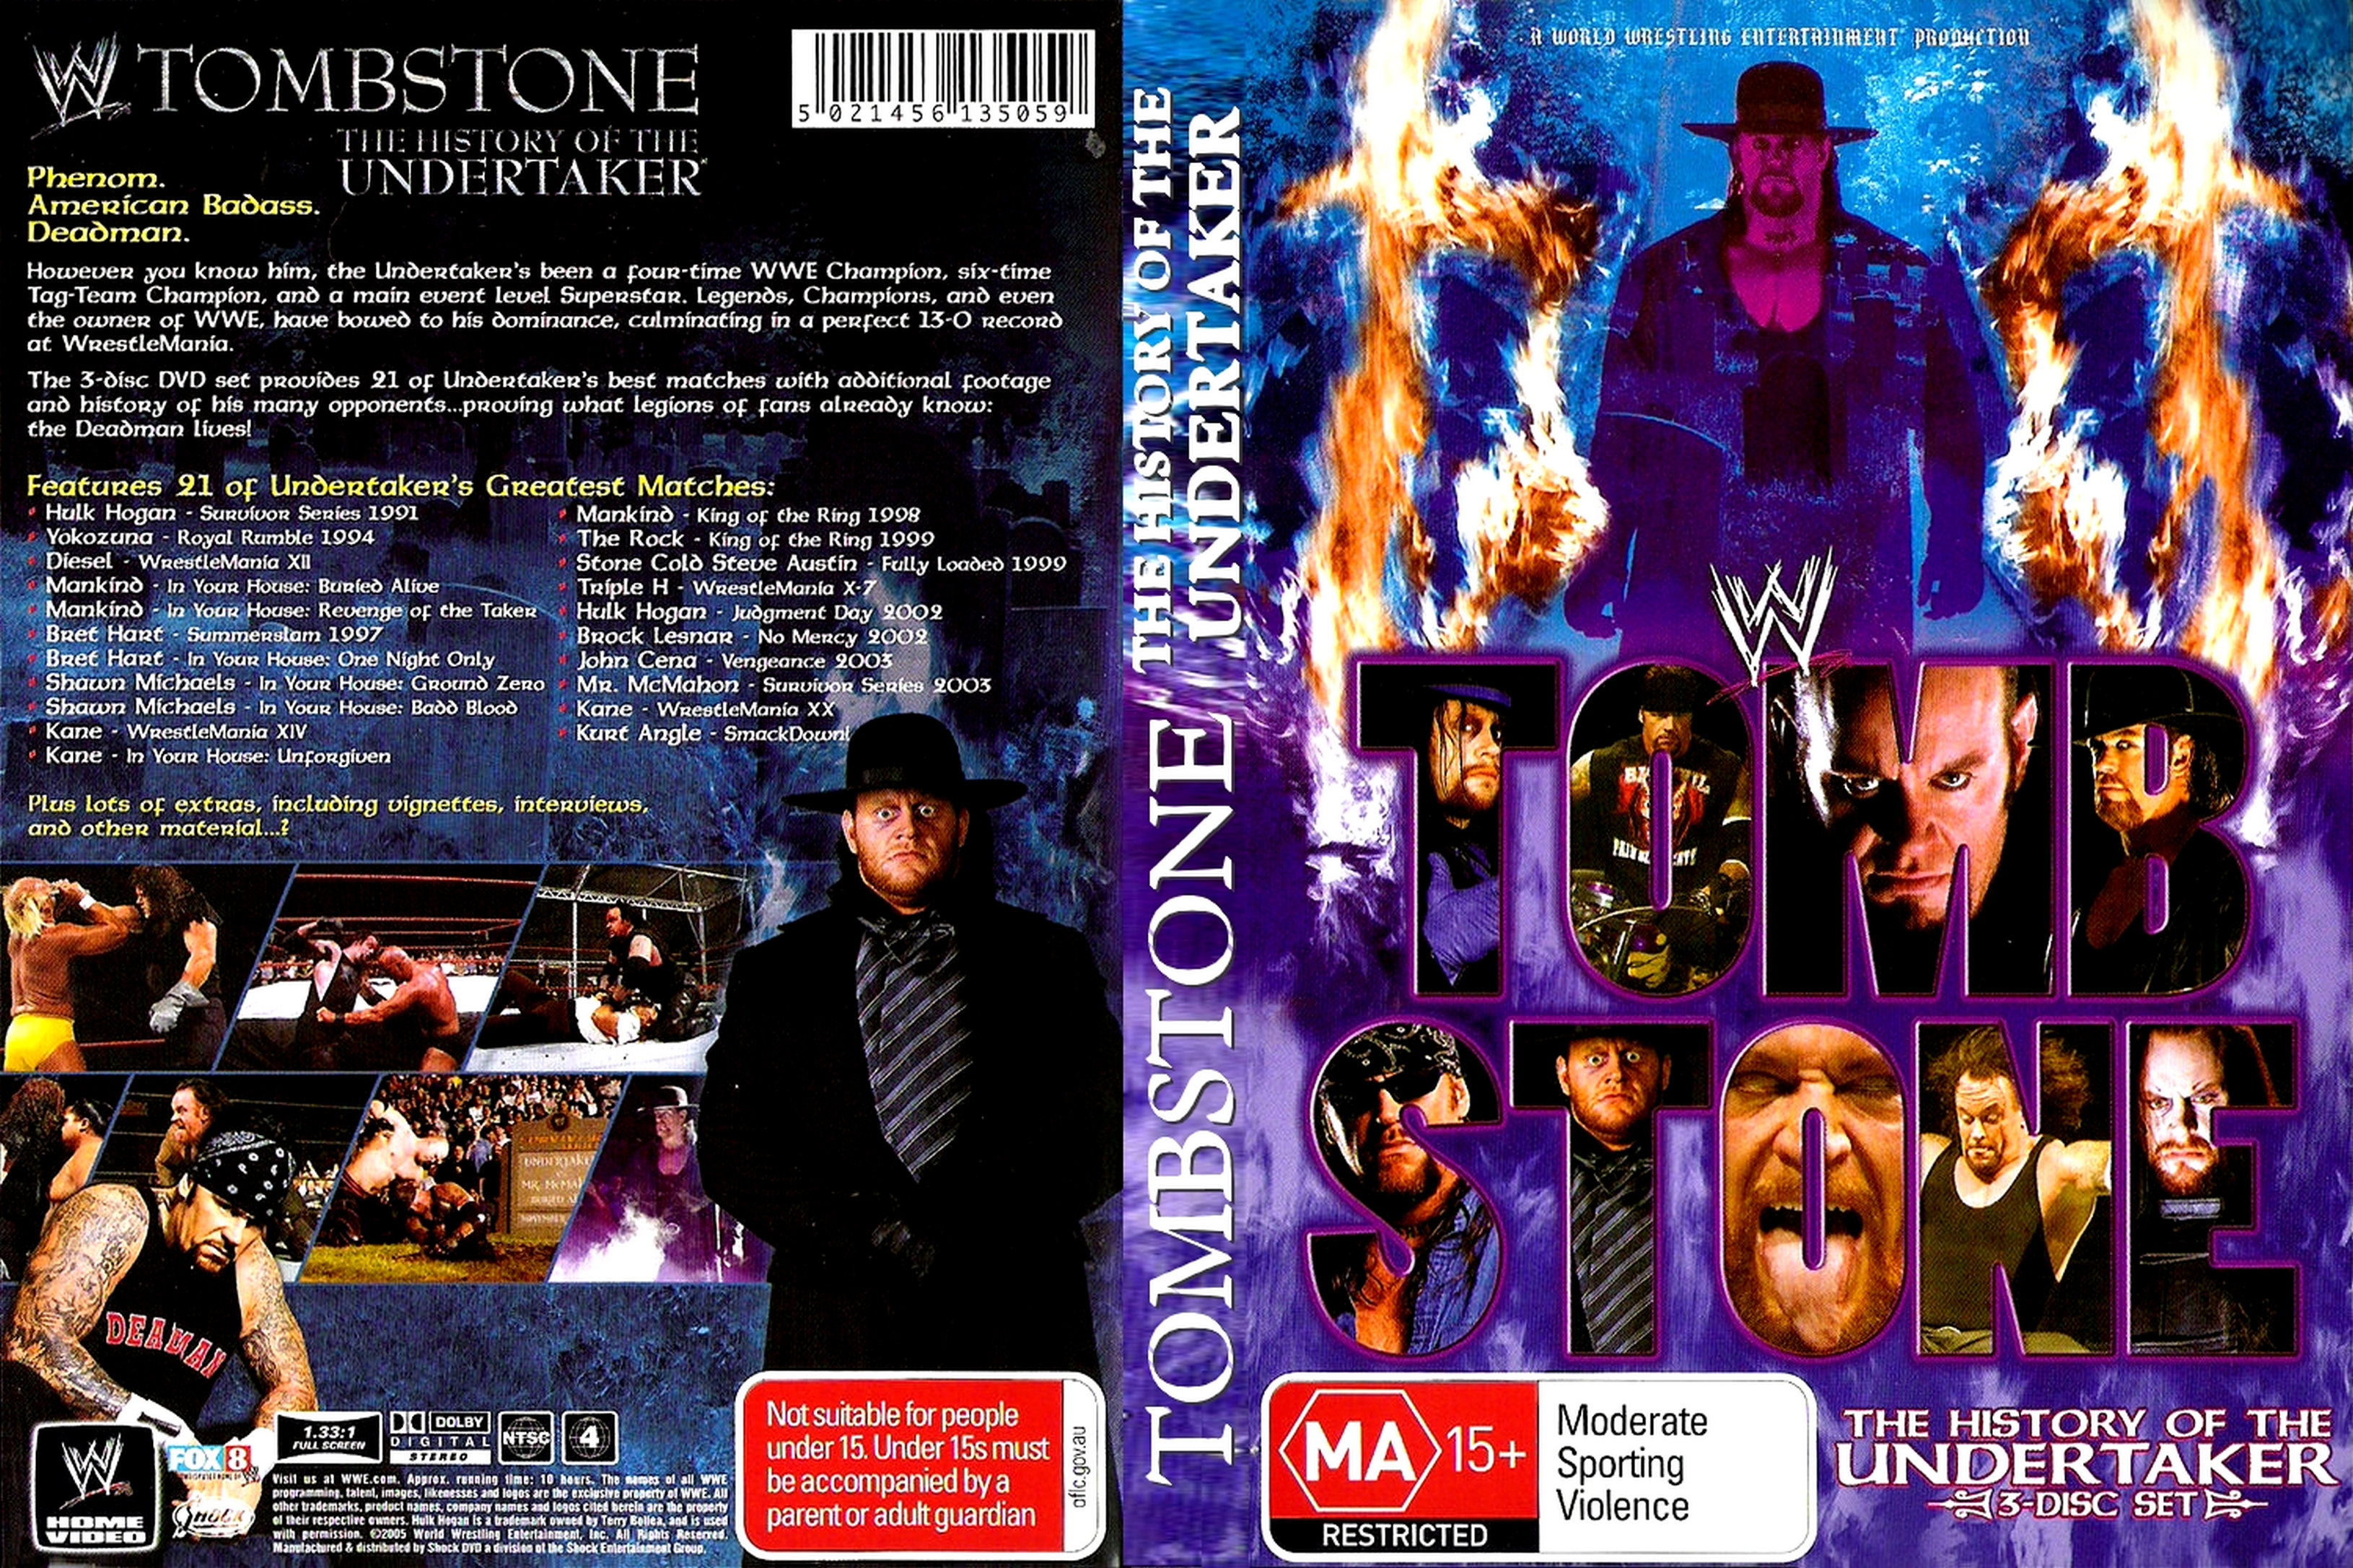 Jaquette DVD Tombstone The history of the Undertaker